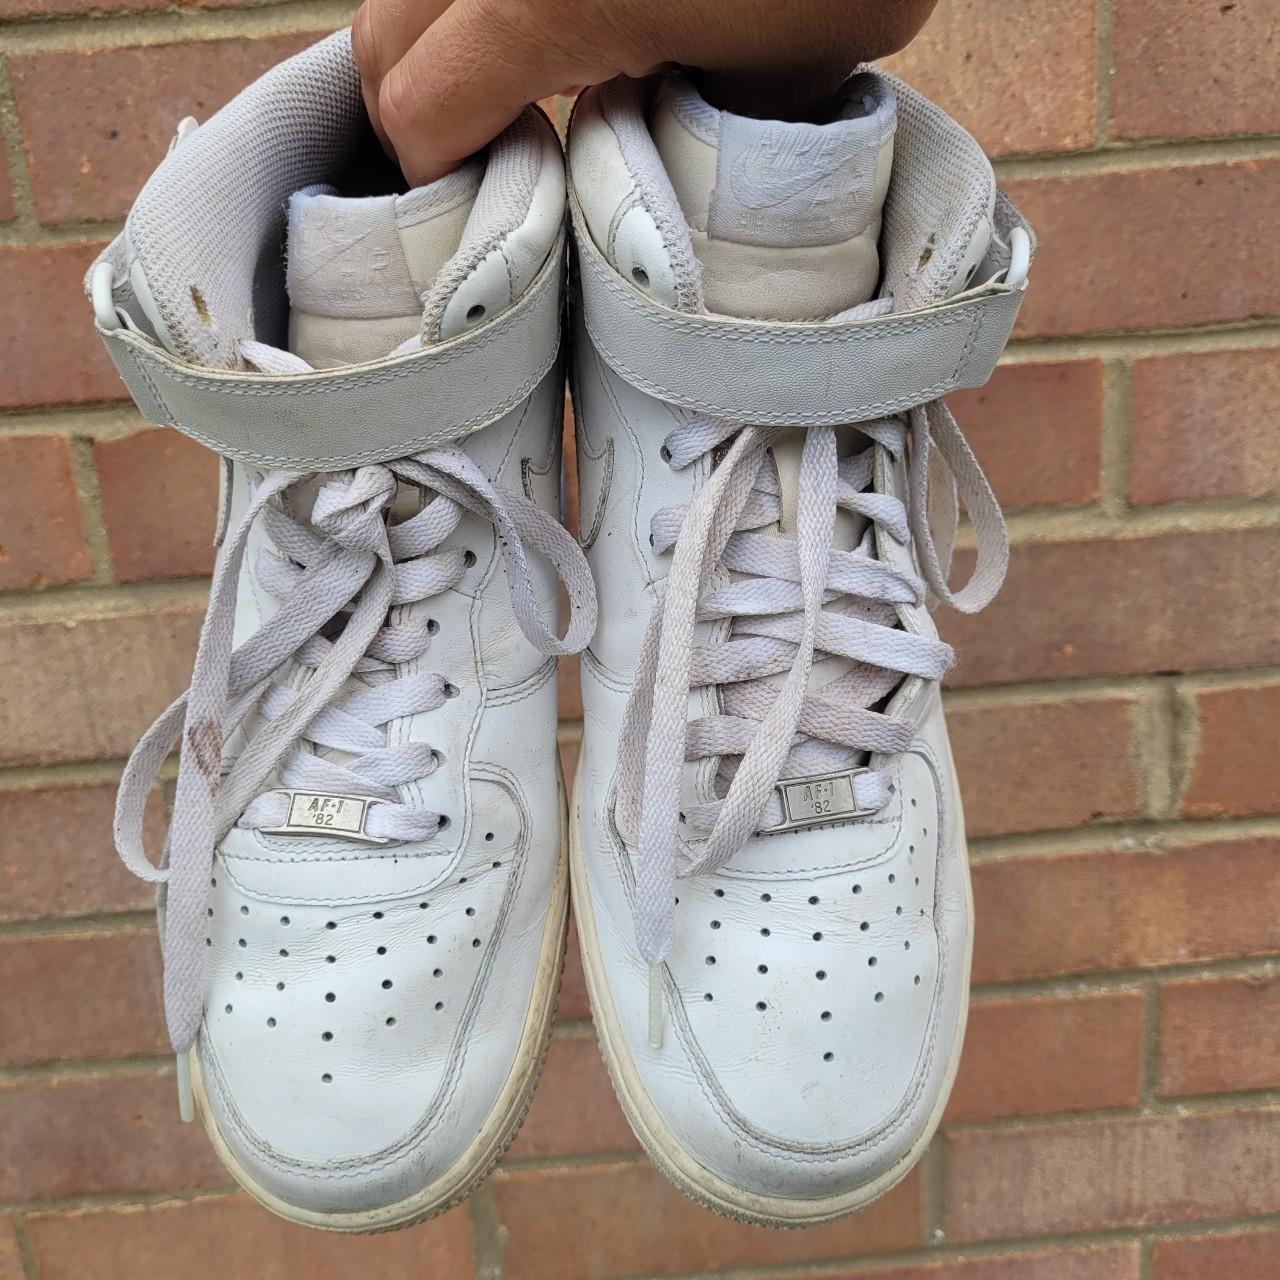 Nike air force 1 Mid white leather trainers UK 7... - Depop